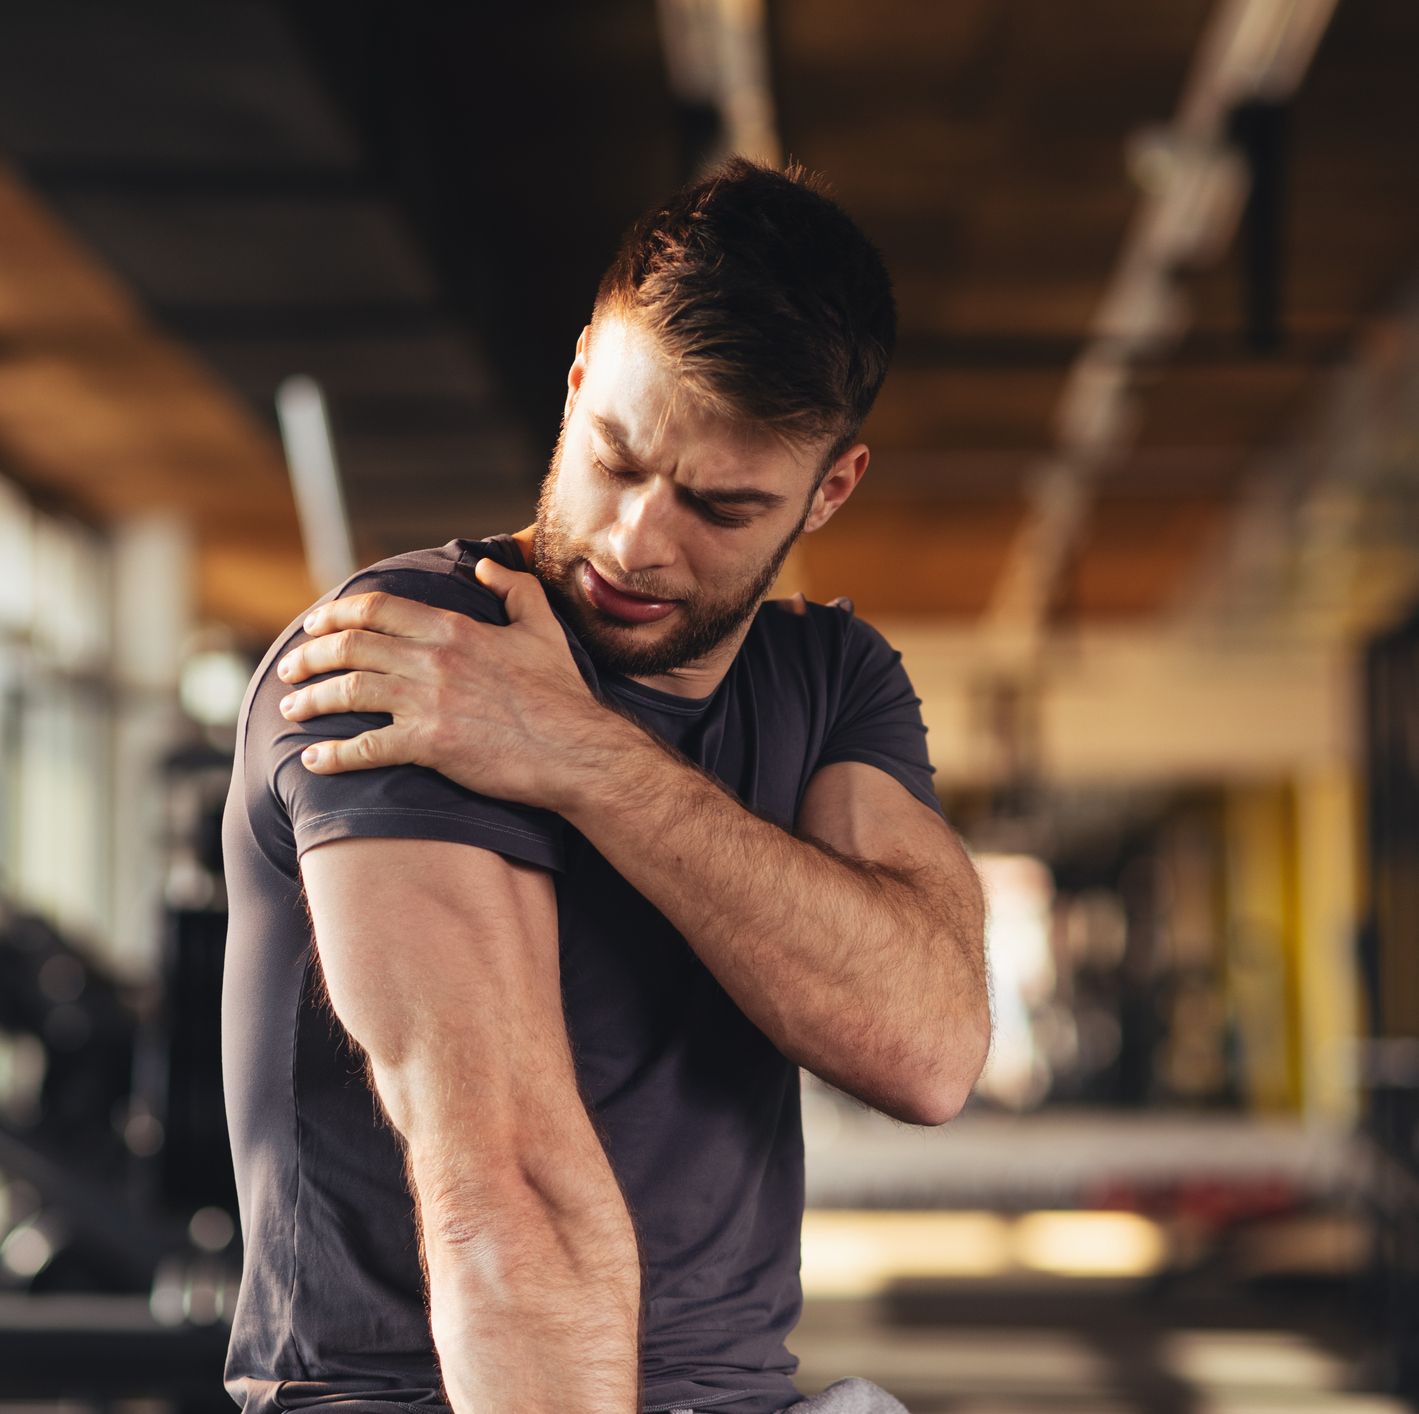 The Top 10 Expert-Backed Ways to Treat Sore Muscles